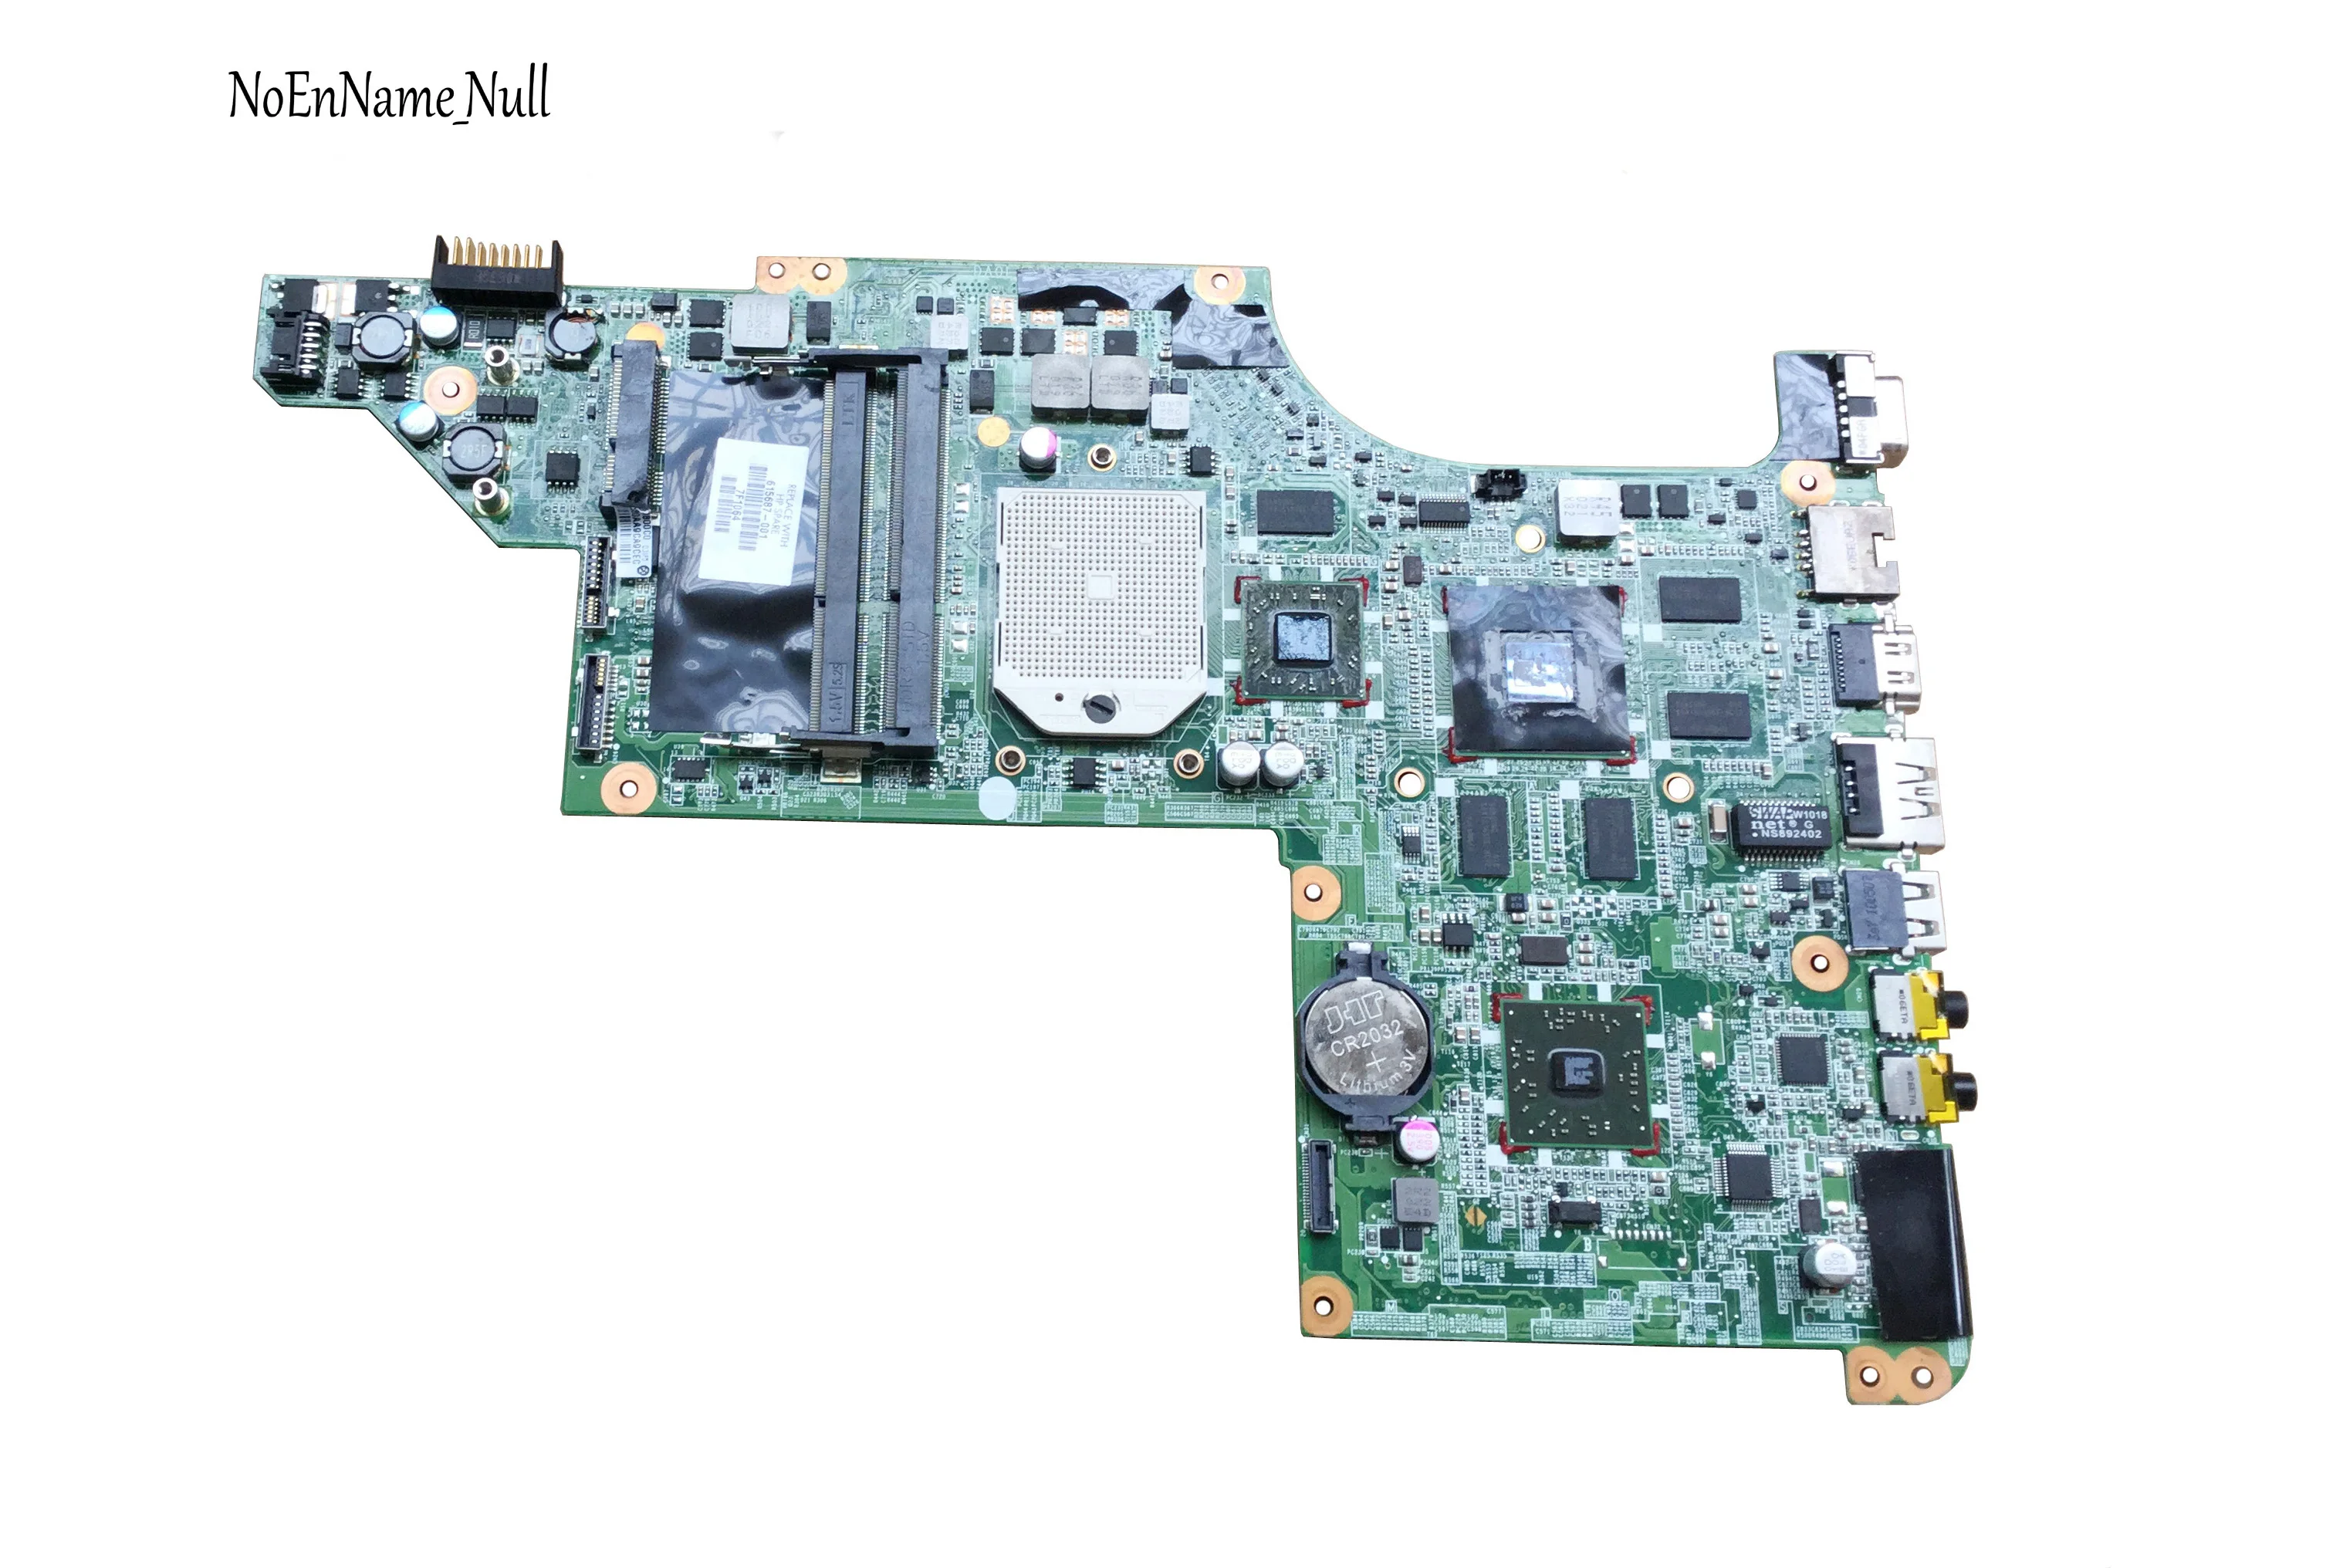 60% OFF  For HP DV7 DV7-4000 615687-001 Laptop Motherboard Mainboard DDR3 100% Tested Free Shipping